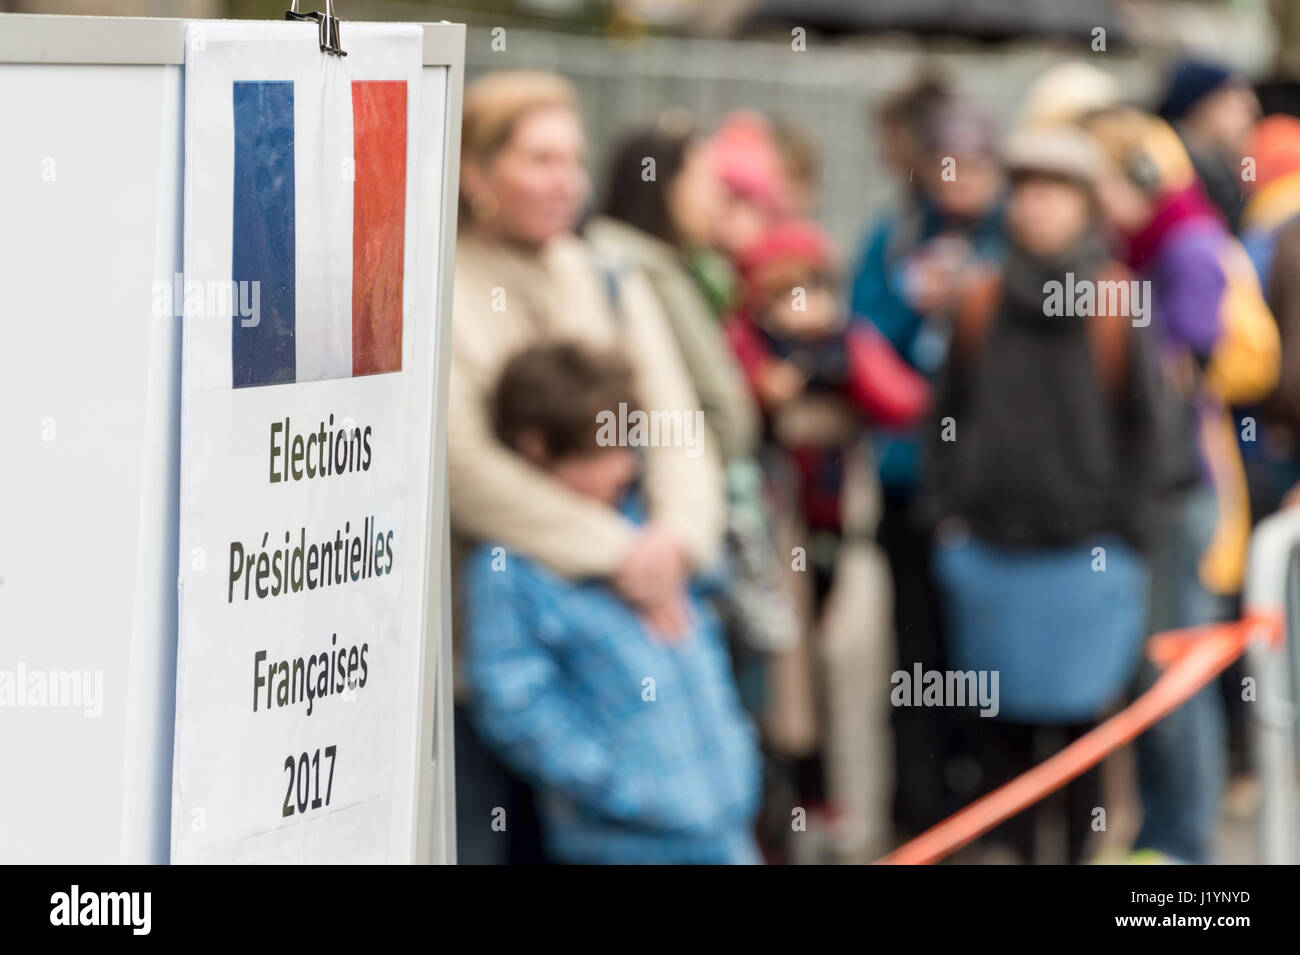 Montreal, CA - 22 April 2017: French nationals in Montreal are lining up at College Stanislas to cast their votes for the first round of the 2017 French presidential election. Credit: Marc Bruxelle/Alamy Live News Stock Photo